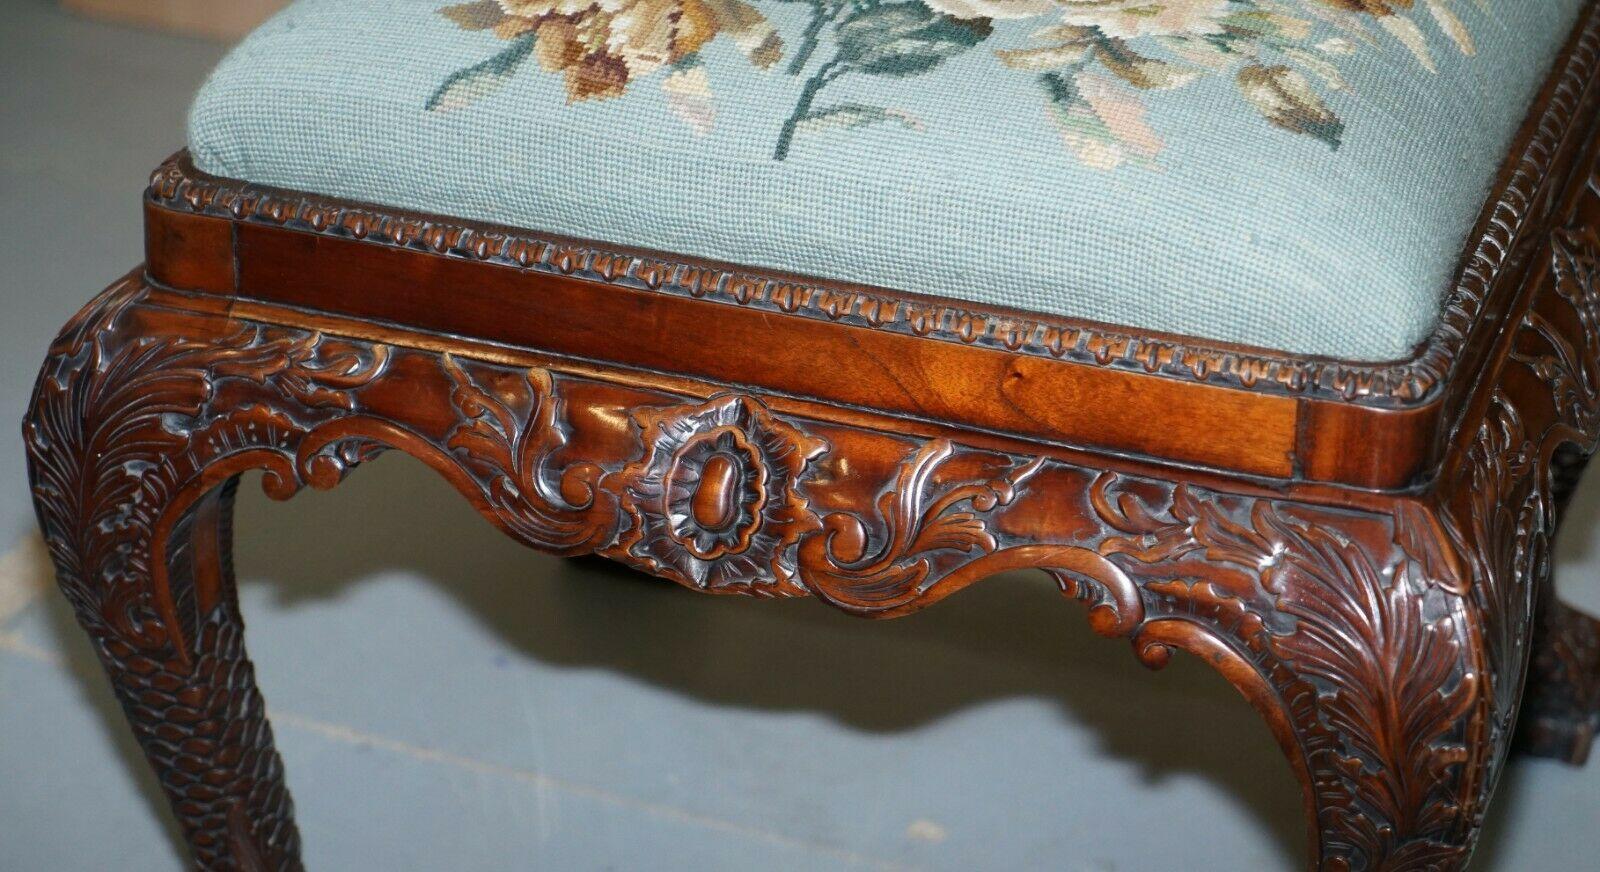 Hand-Crafted George II Hand Carved Mahogany Floral Embroidered Stool for Dressing Table Piano